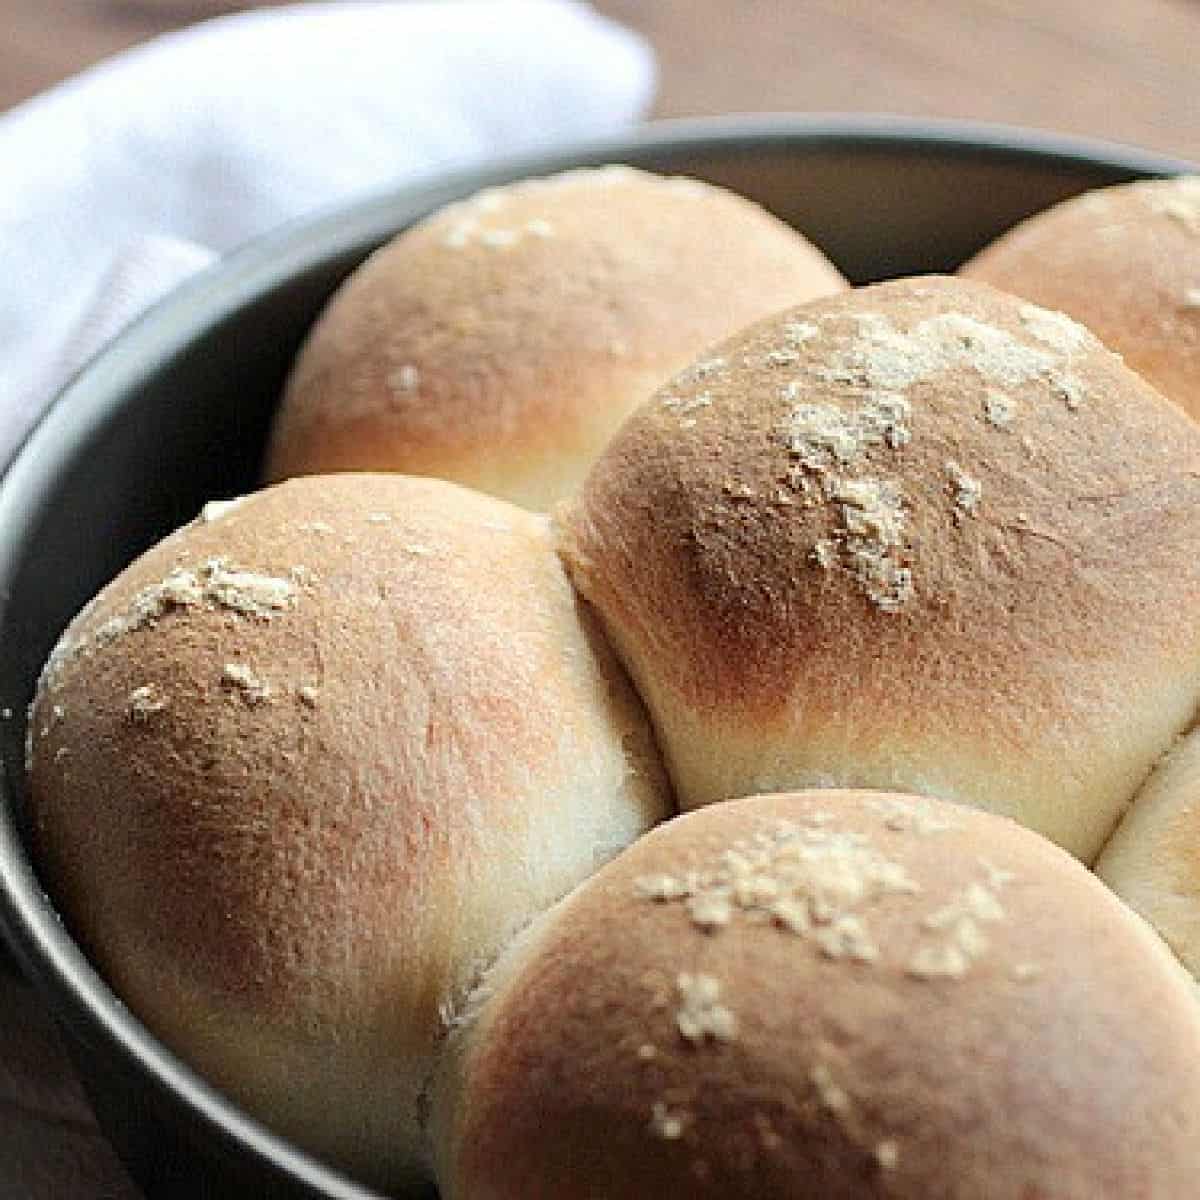 Metal pan with freshly baked rolls on wooden table, a kitchen towel.